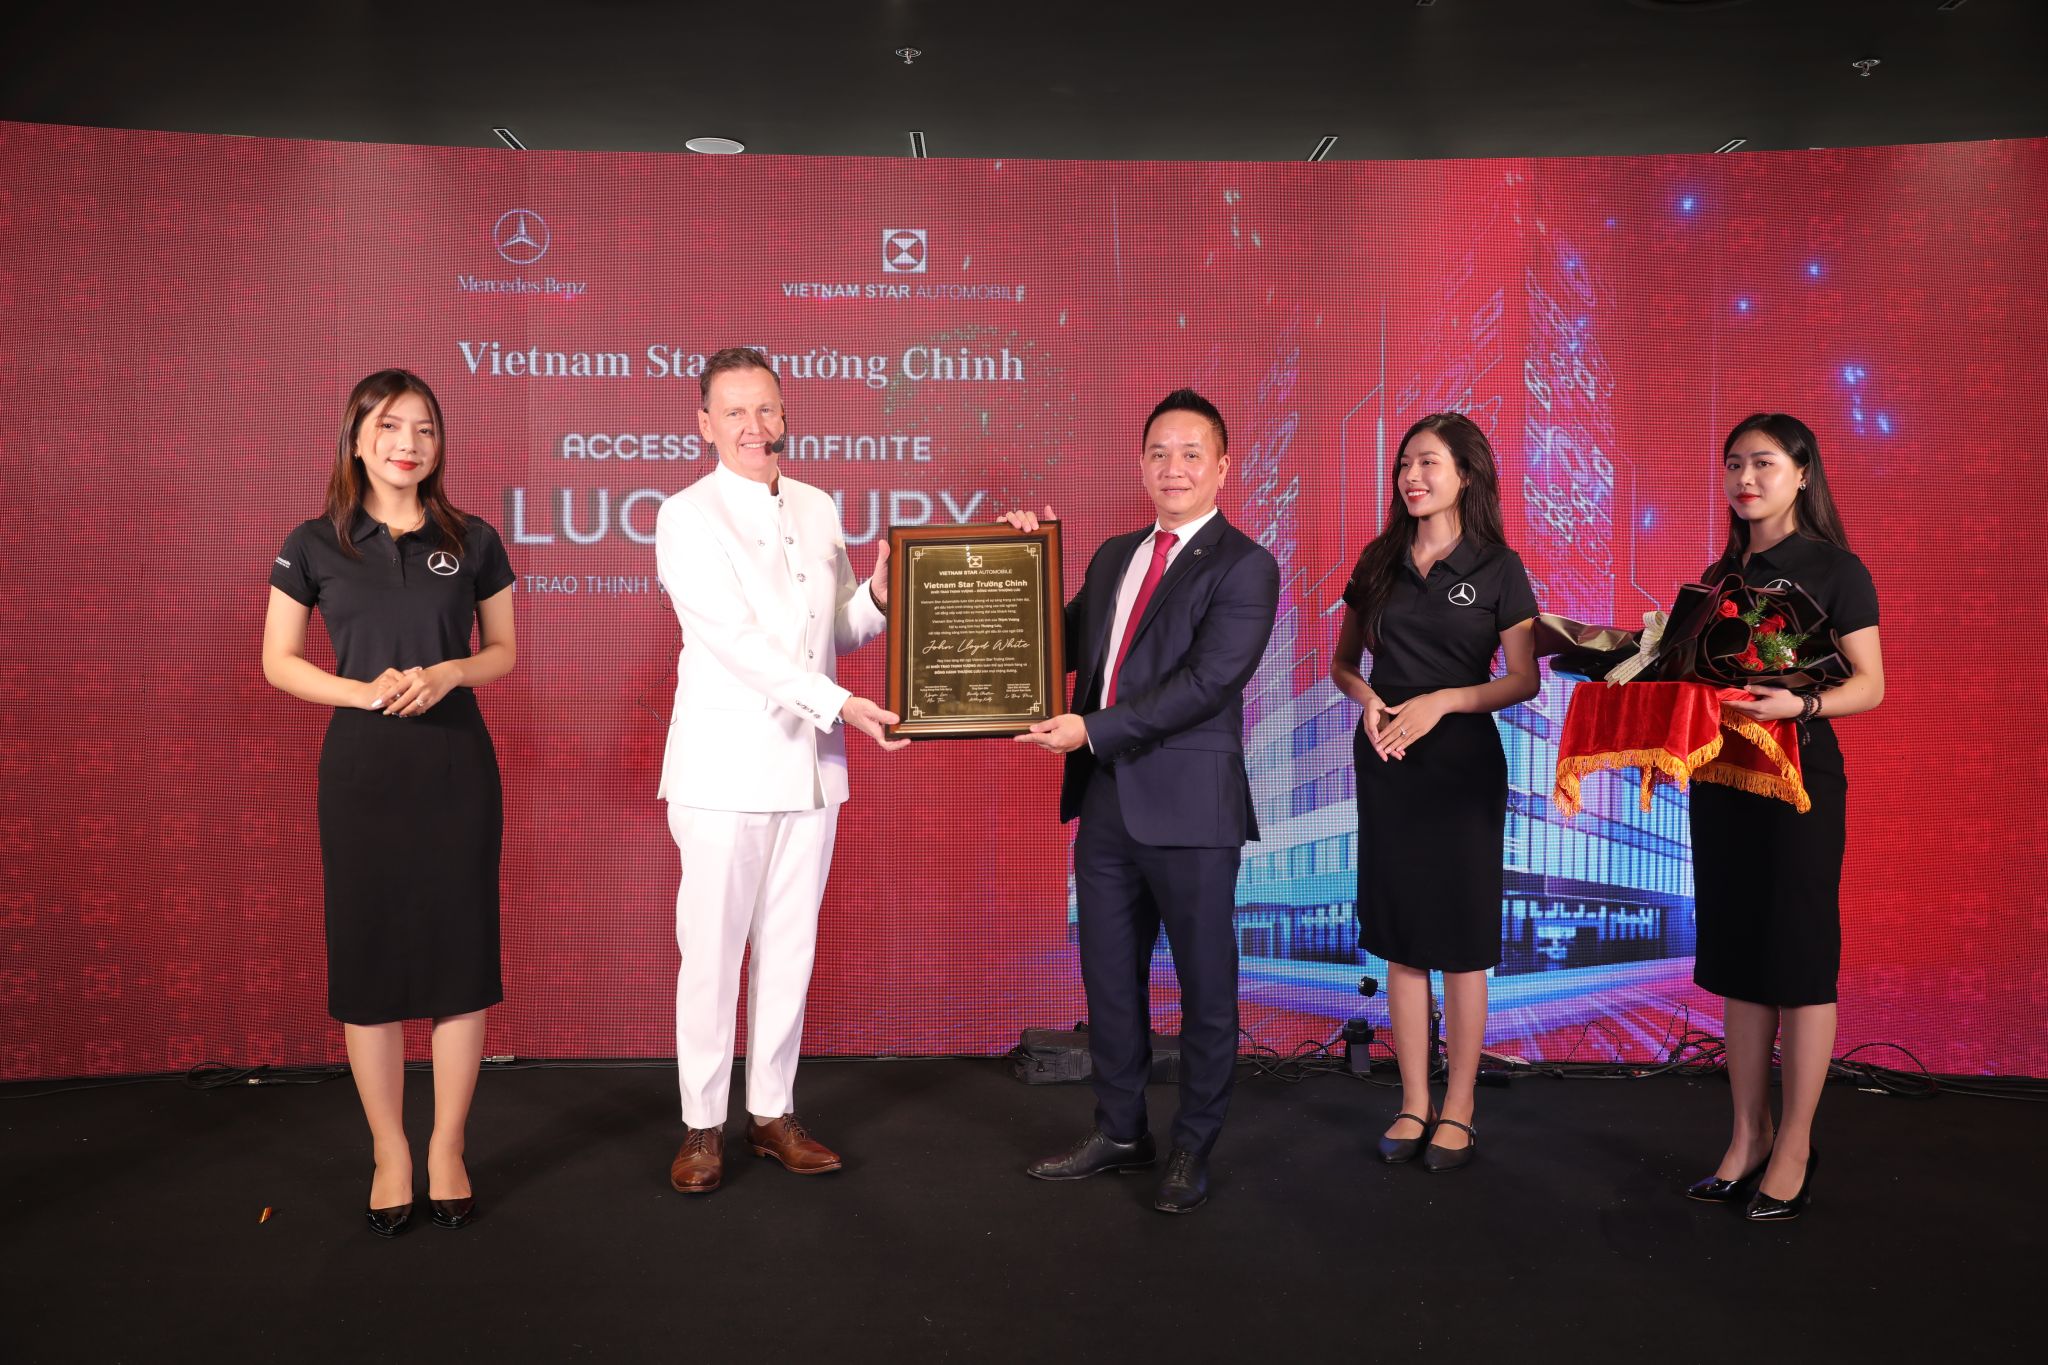 Mercedes-Benz Vietnam Star Truong Chinh showroom officially opens. First MAR2020 showroom in Ho Chi Minh City.